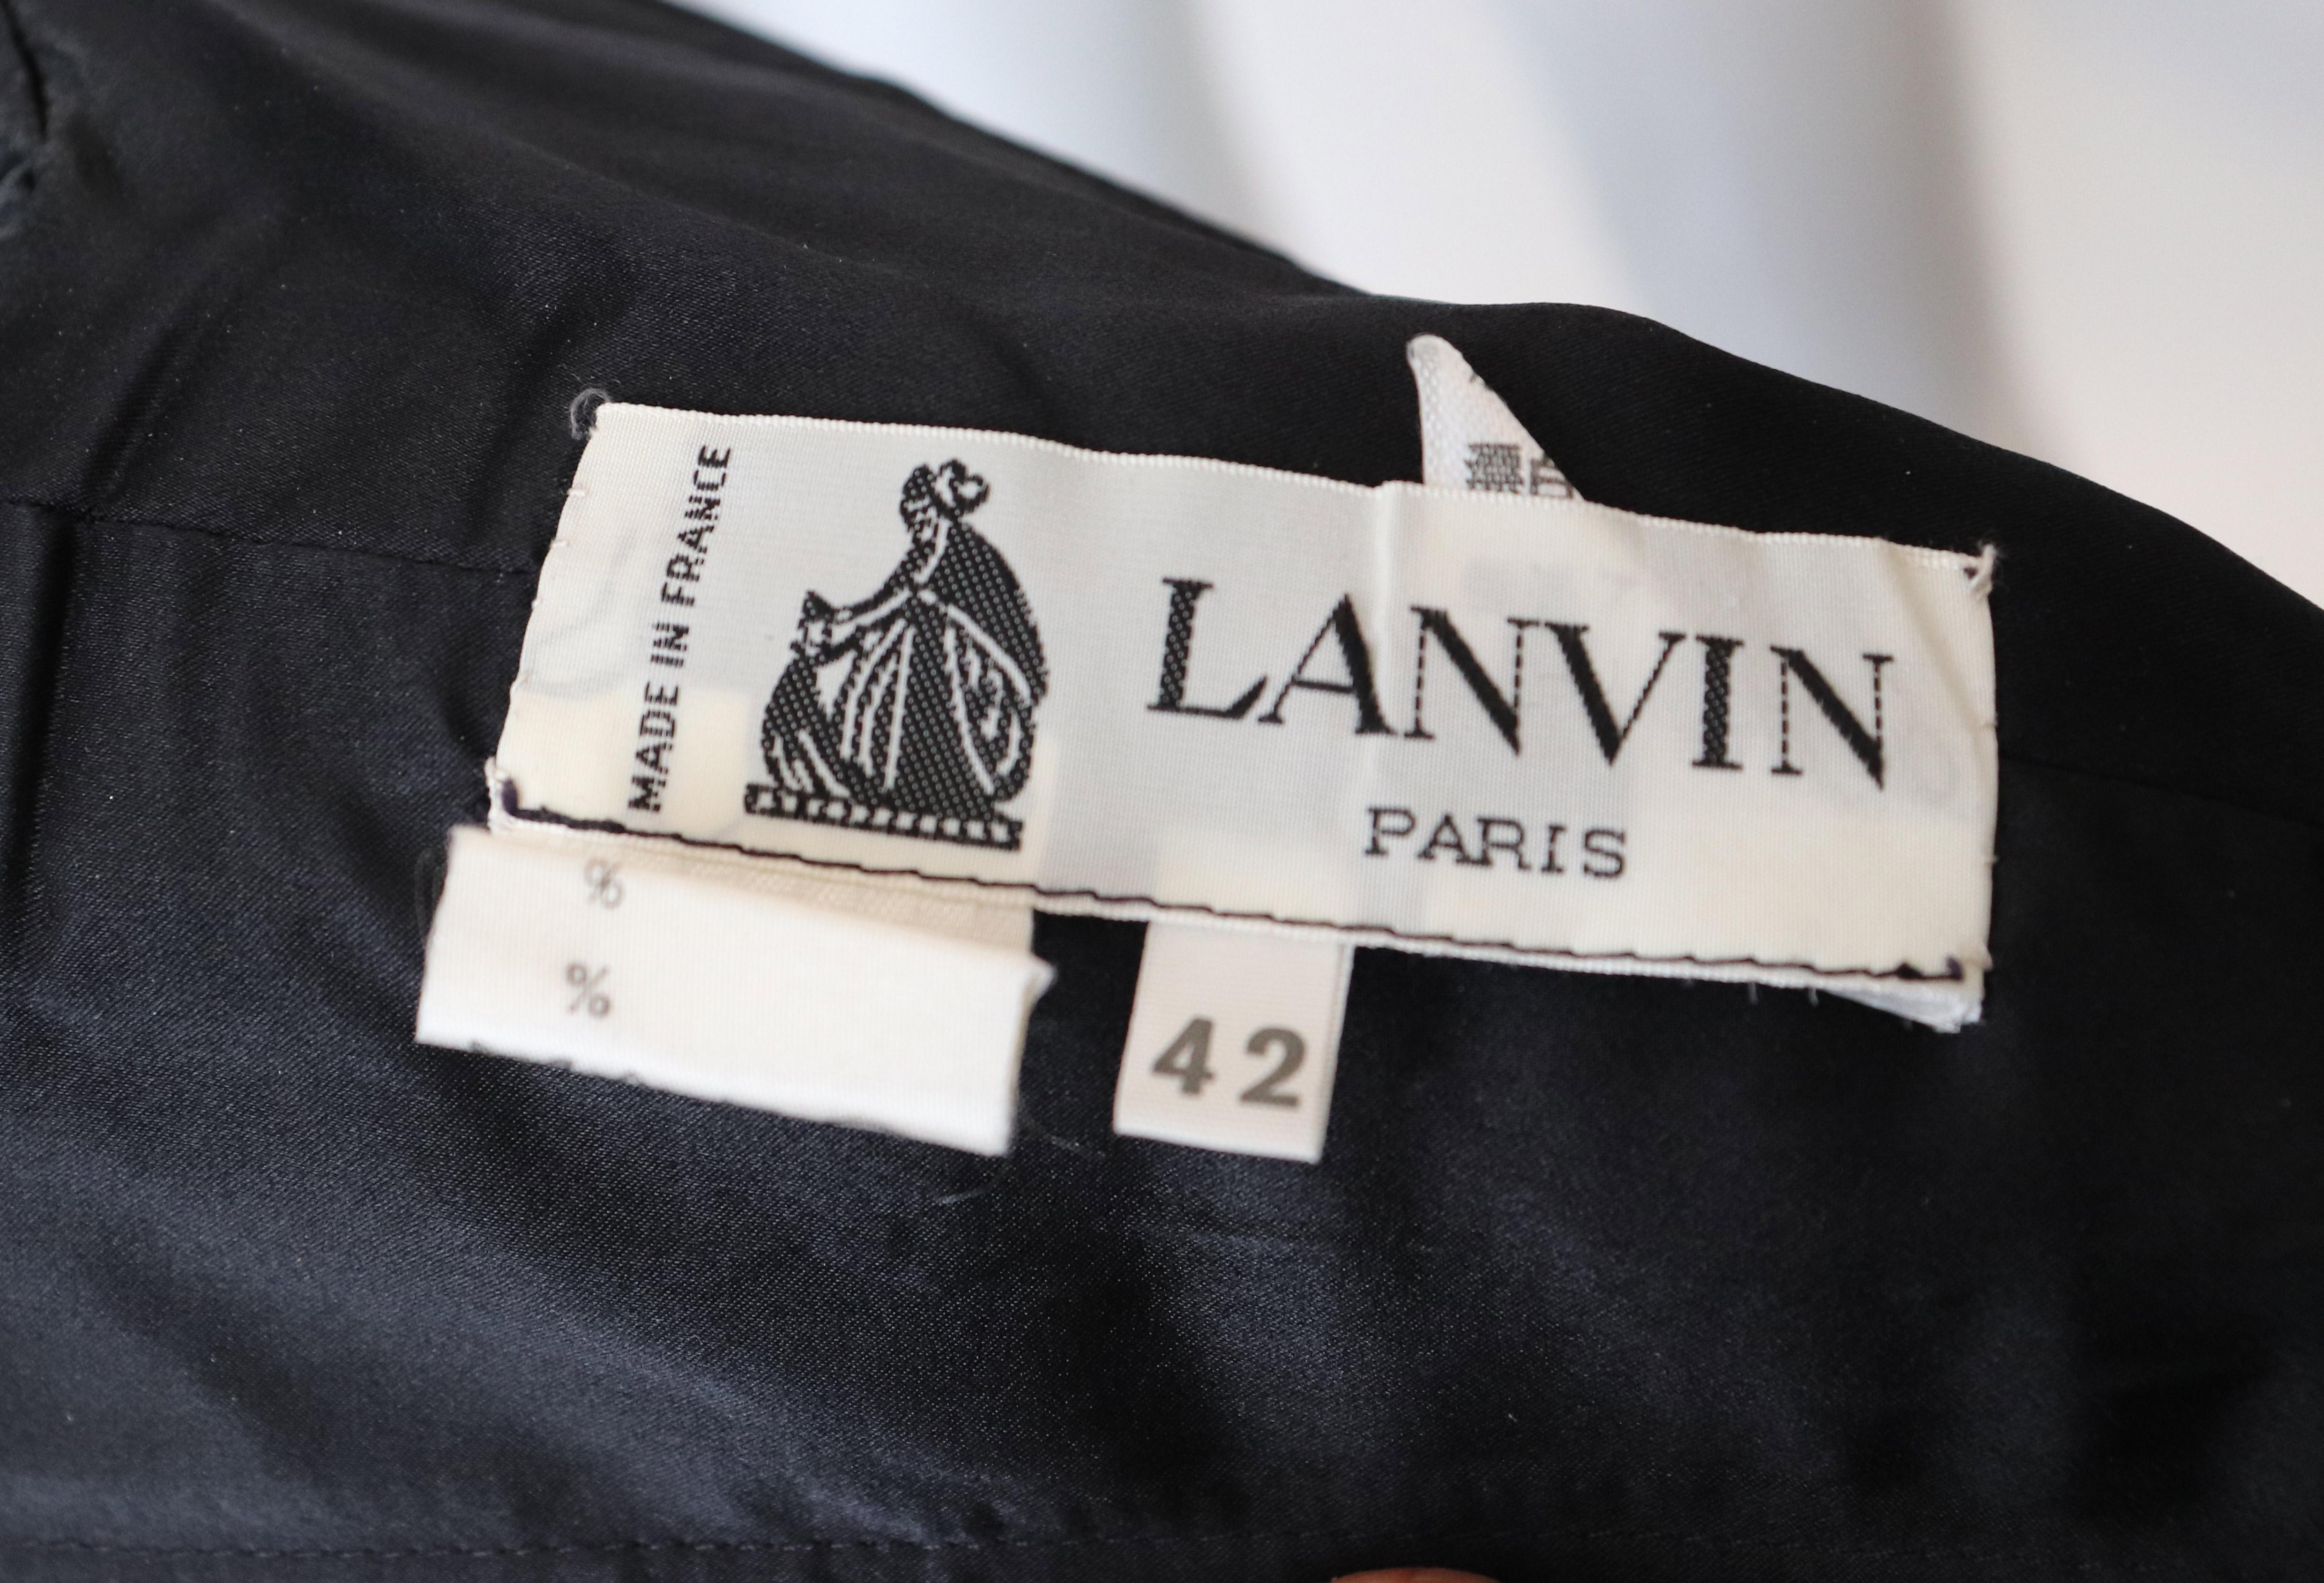 A chic black velet dress by Lanvin Paris. The dress should be worn off the shoulder with the ribbon ties on the shoulder. It is fully lined, with a central back zip, and has internal waist ties.